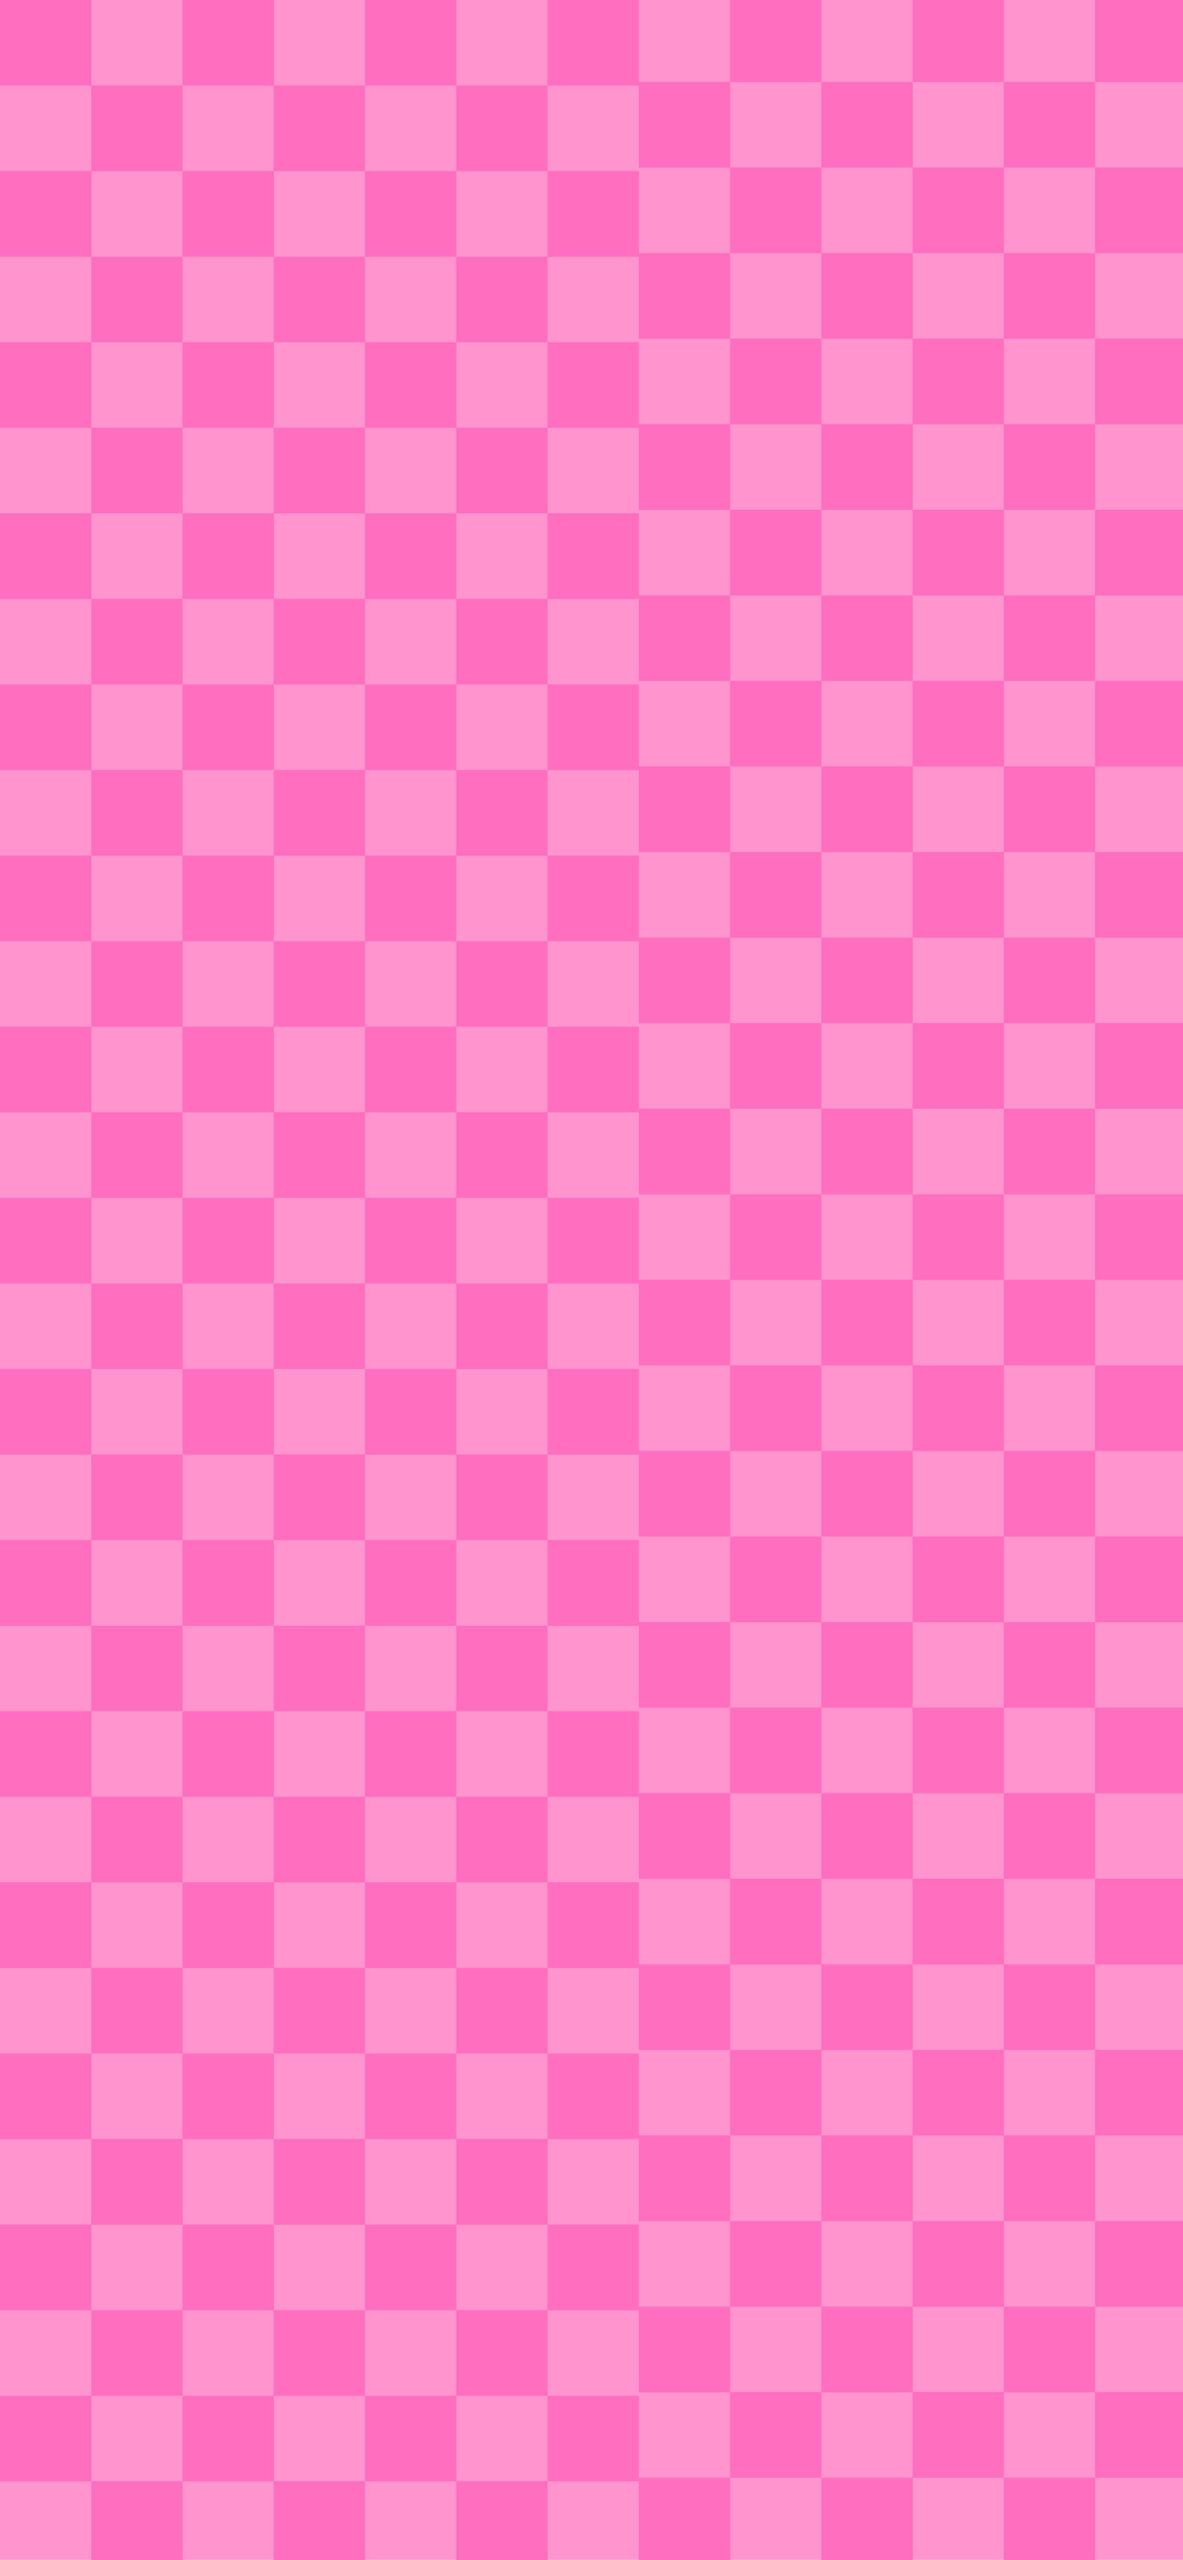 A pink and white checkered background - Pink, checkered